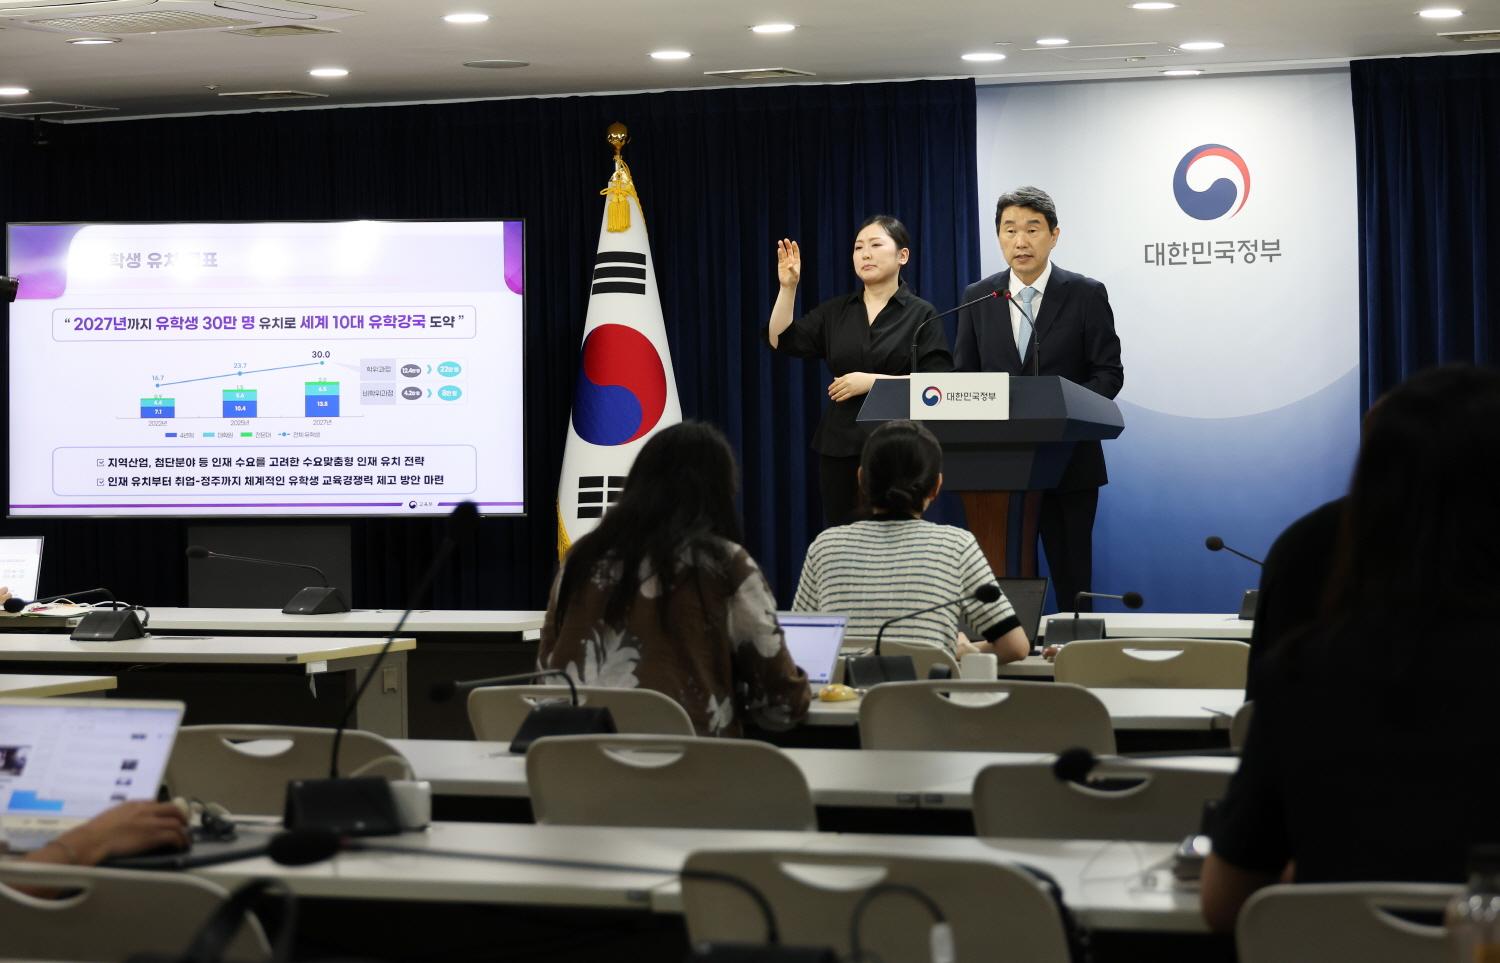 Ministry of Education Announces Study Korea 300K Project (5)